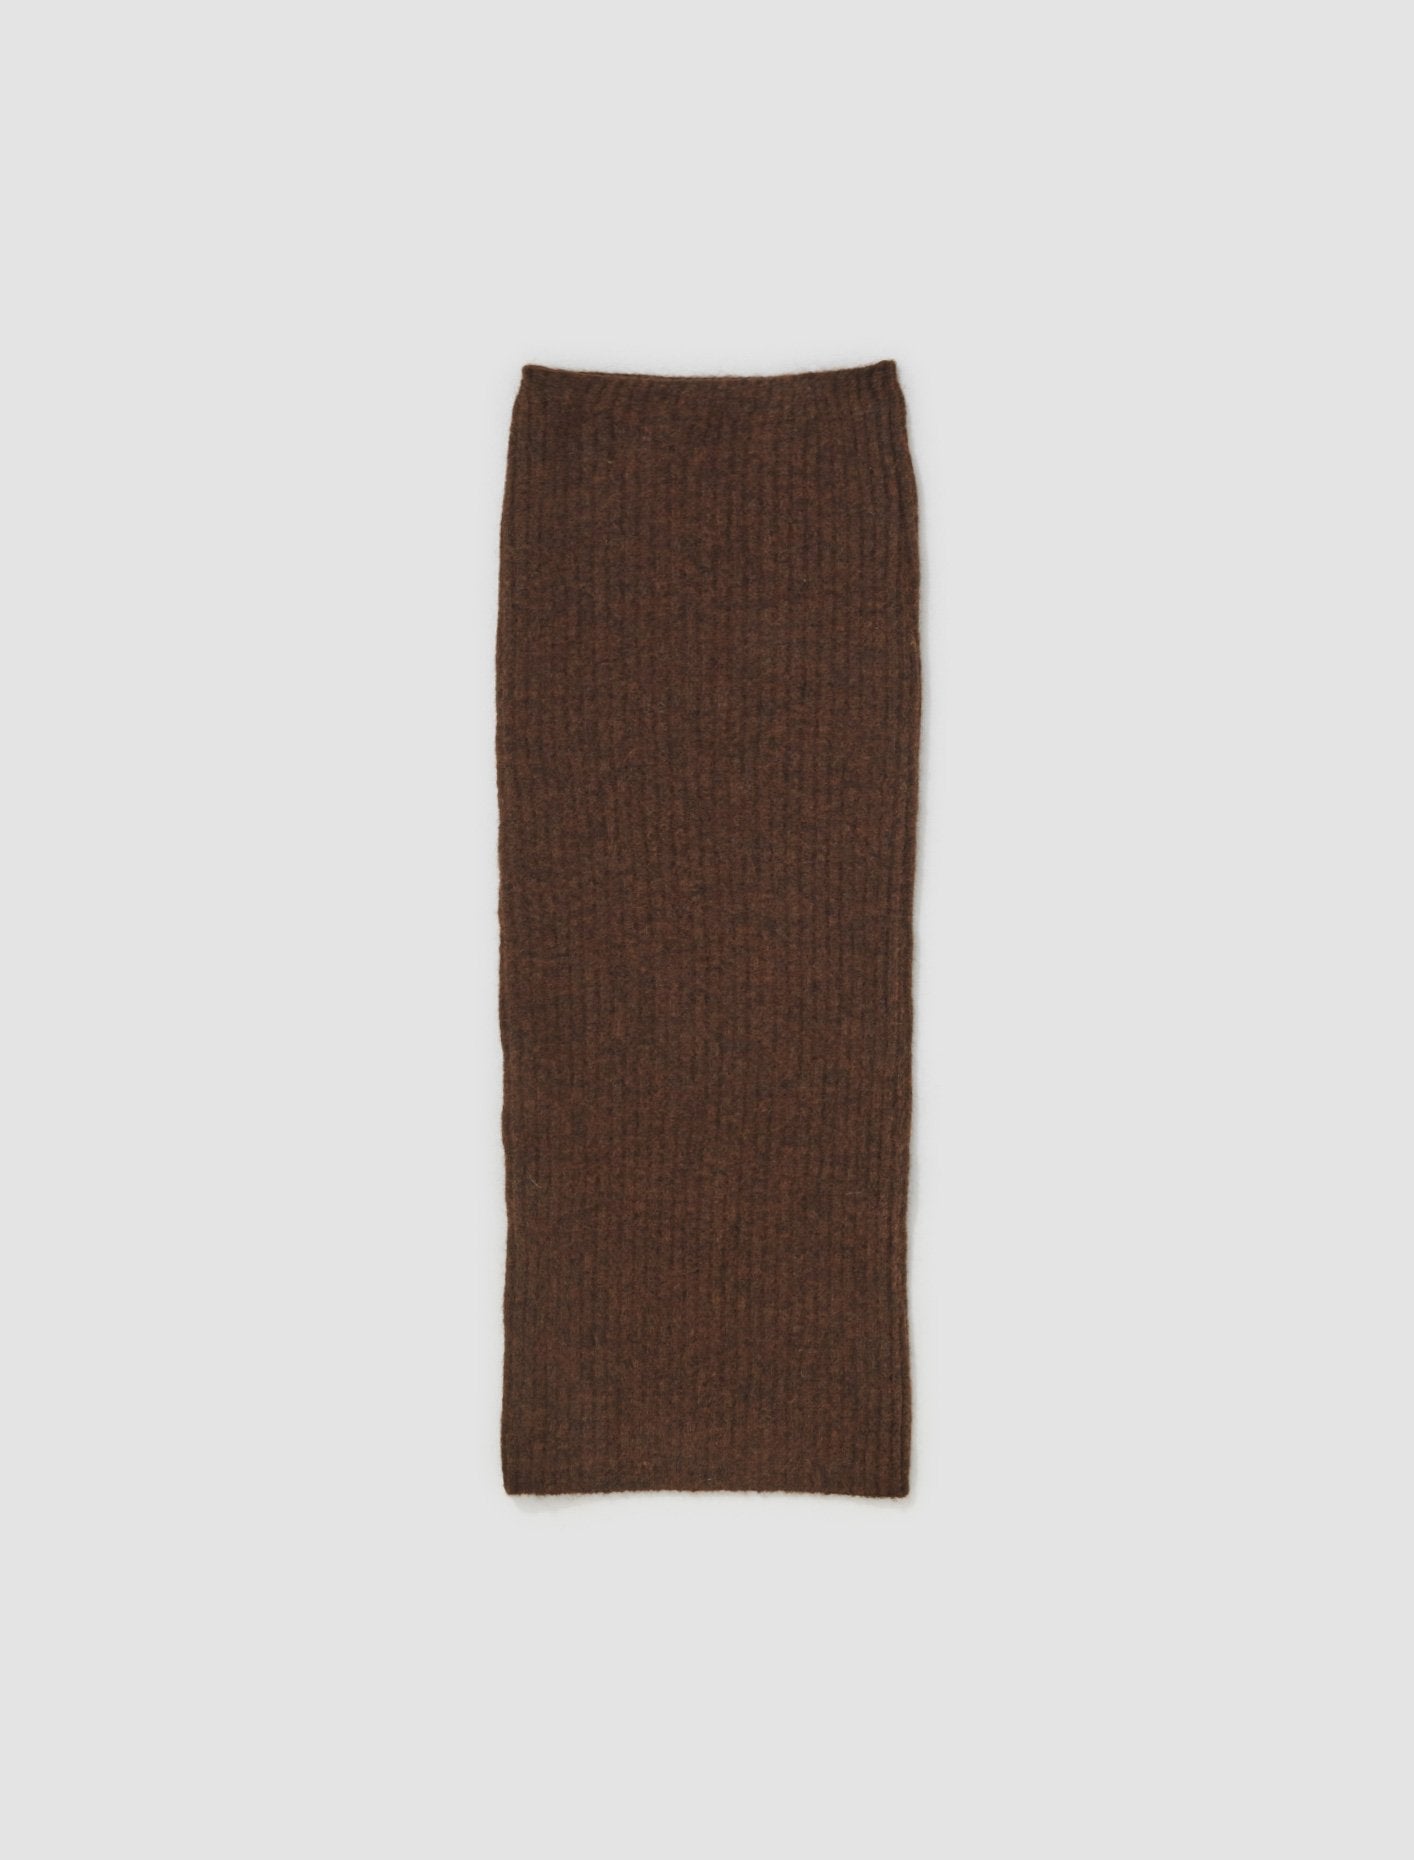 Siracuza Skirt in Brown